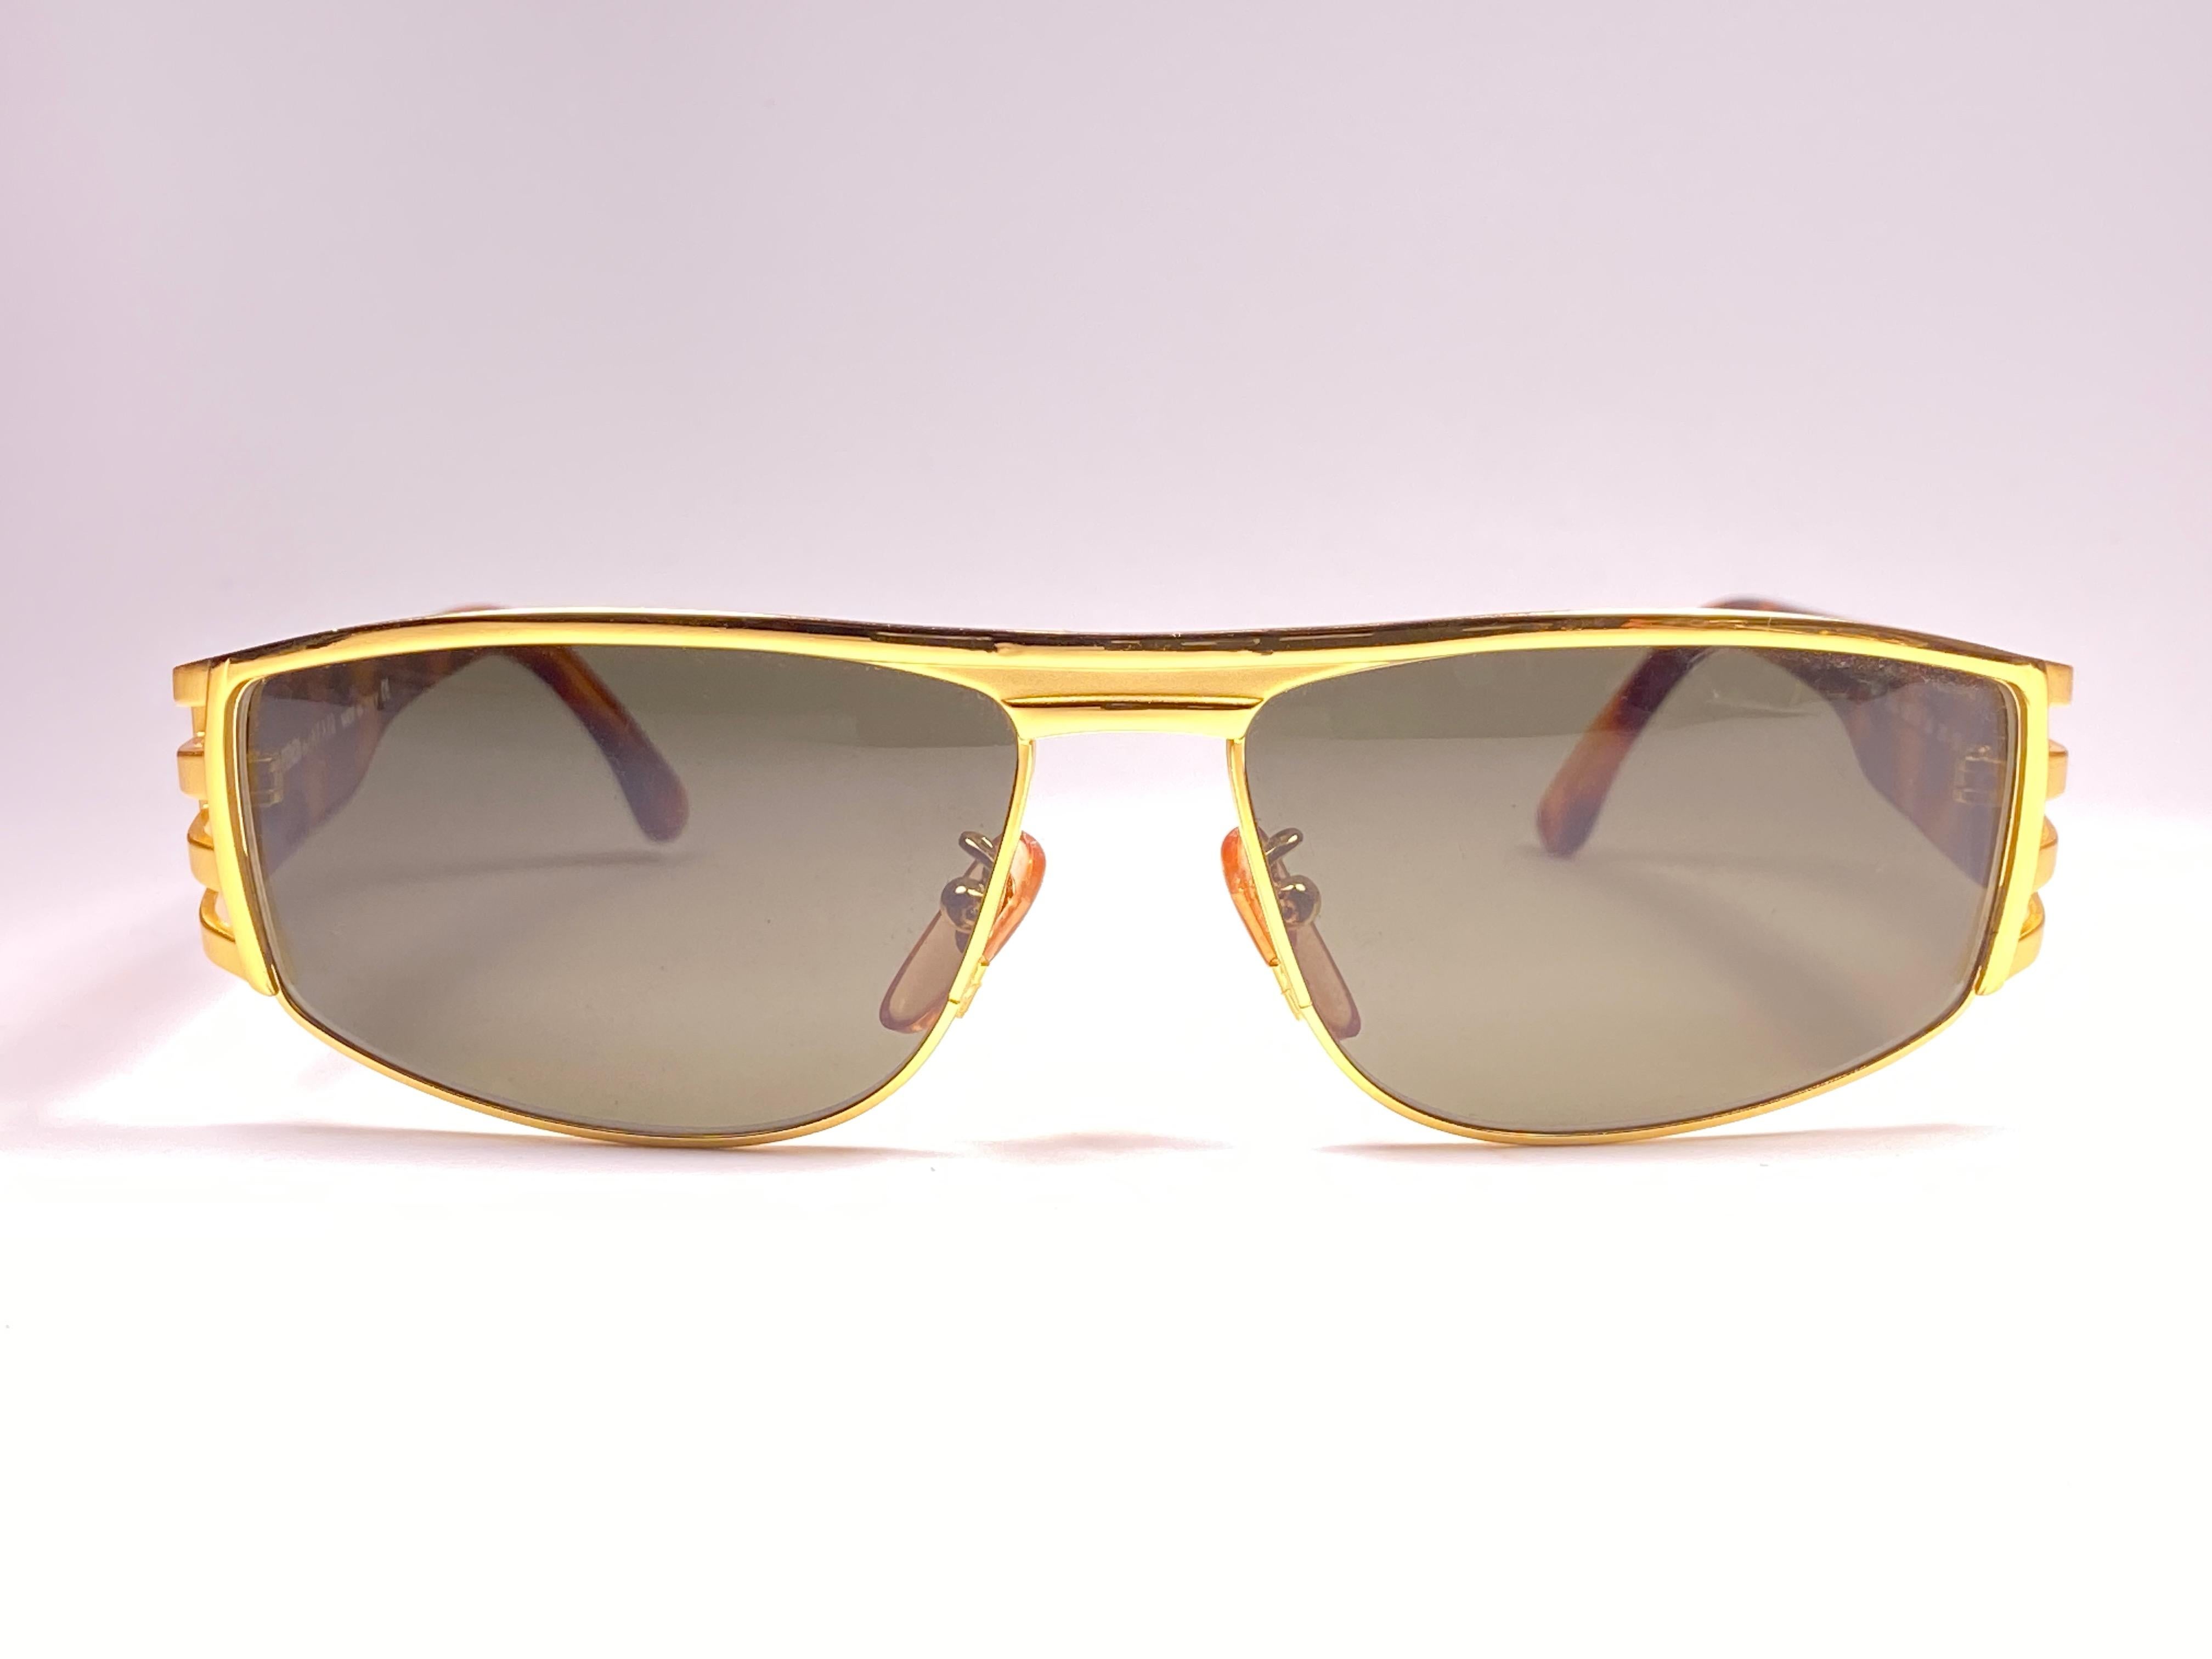 New Fendi gold & tortoise oval large frame with solid grey ( UV protection ) lenses.

Made in Italy.

Produced and design in 1990's.

New, never worn or displayed. this item may show minor sign of wear due to storage.

The front is 13.5 cms 
Lens